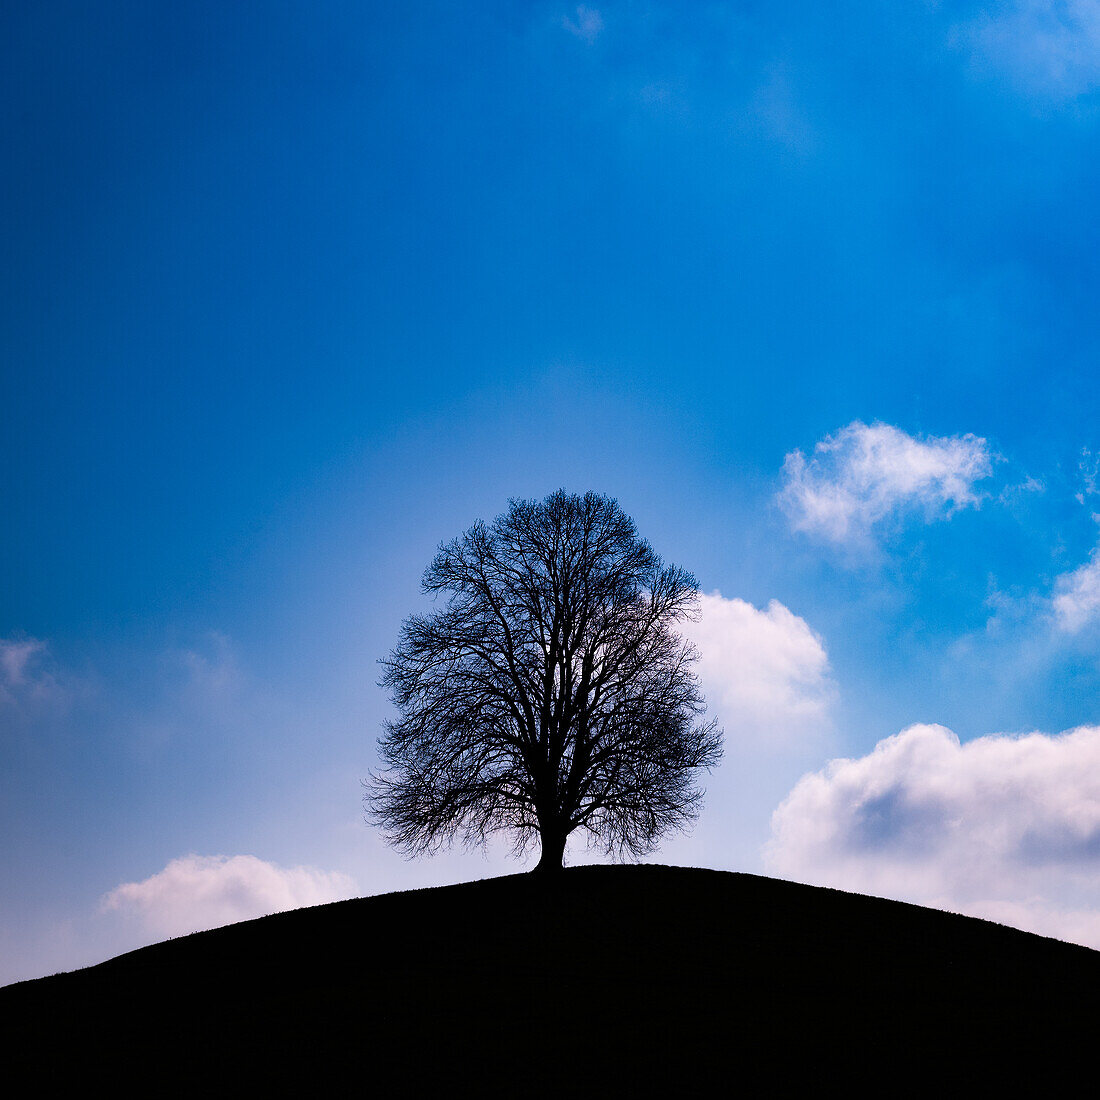 hill with lonely tree; Canton of Zug, Switzerland